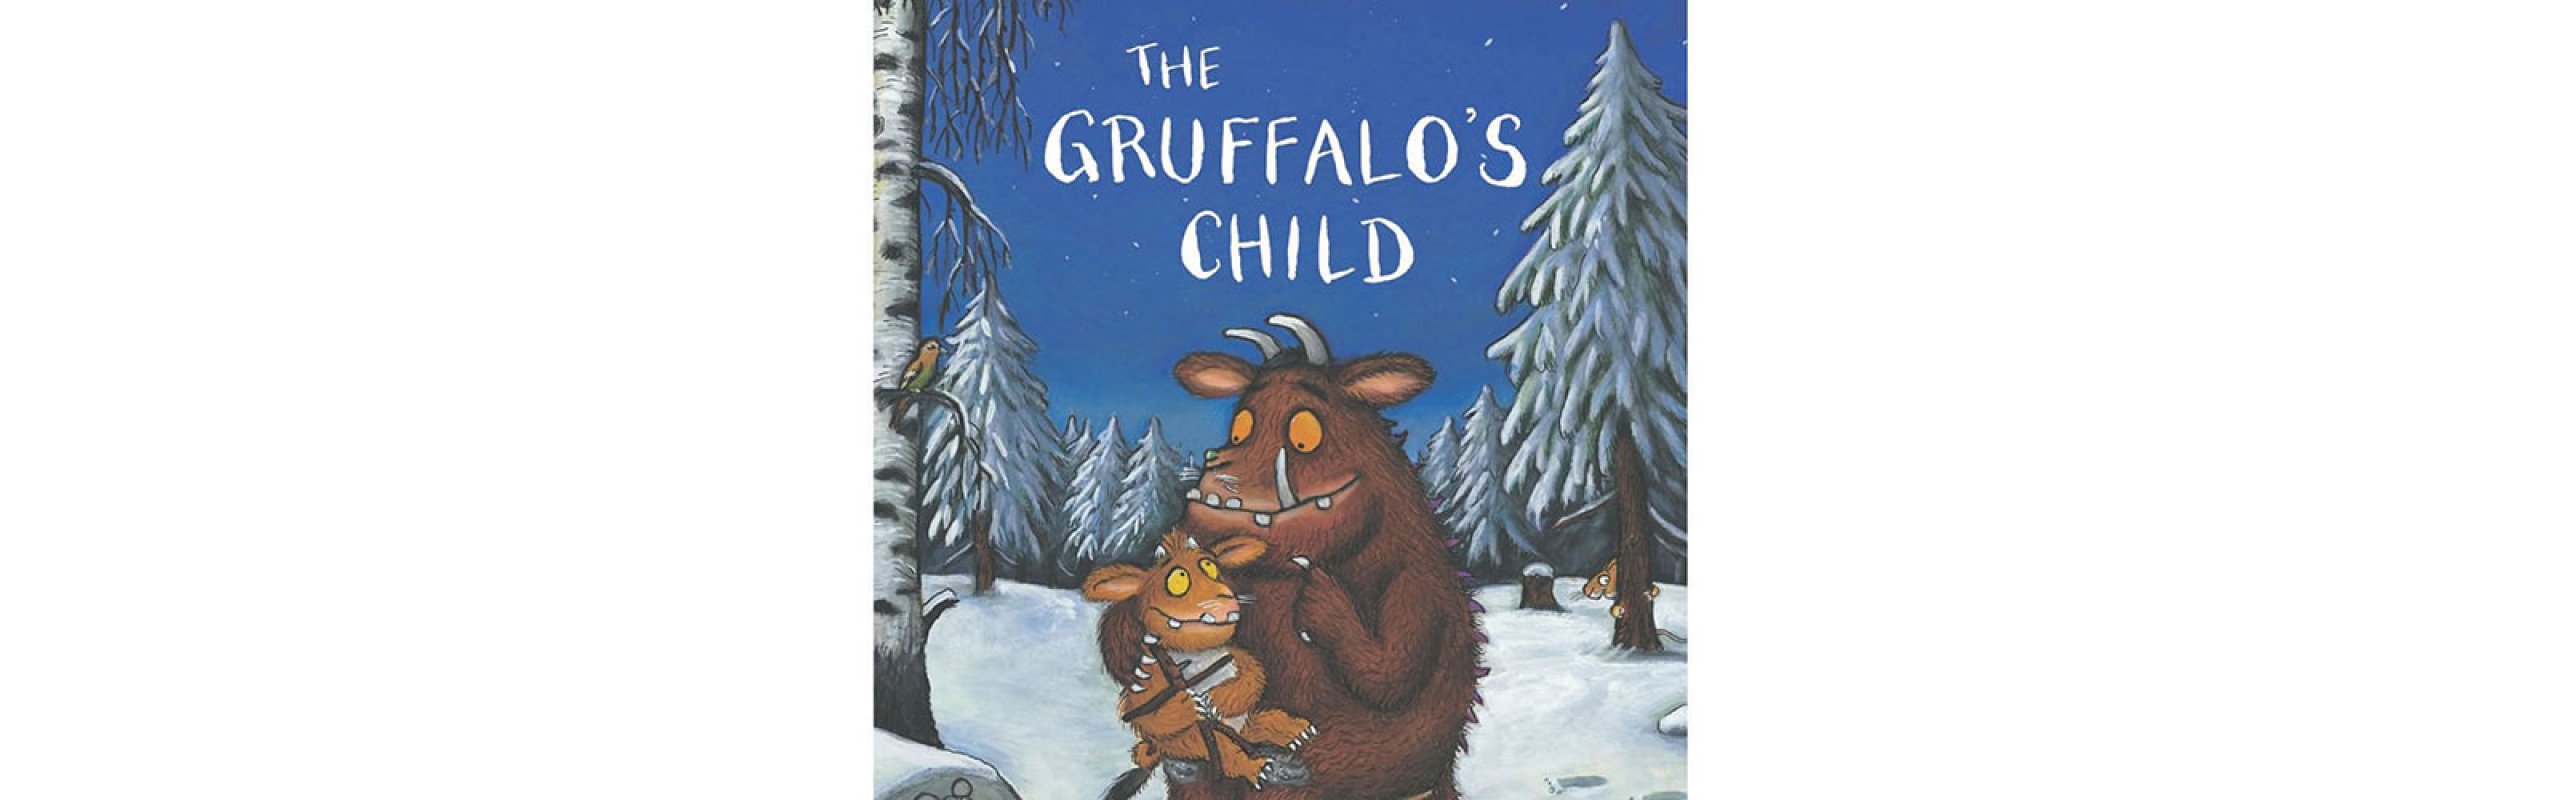 Halloween Party! The Gruffalo's Child by Julia Donaldson and Axel Scheffler